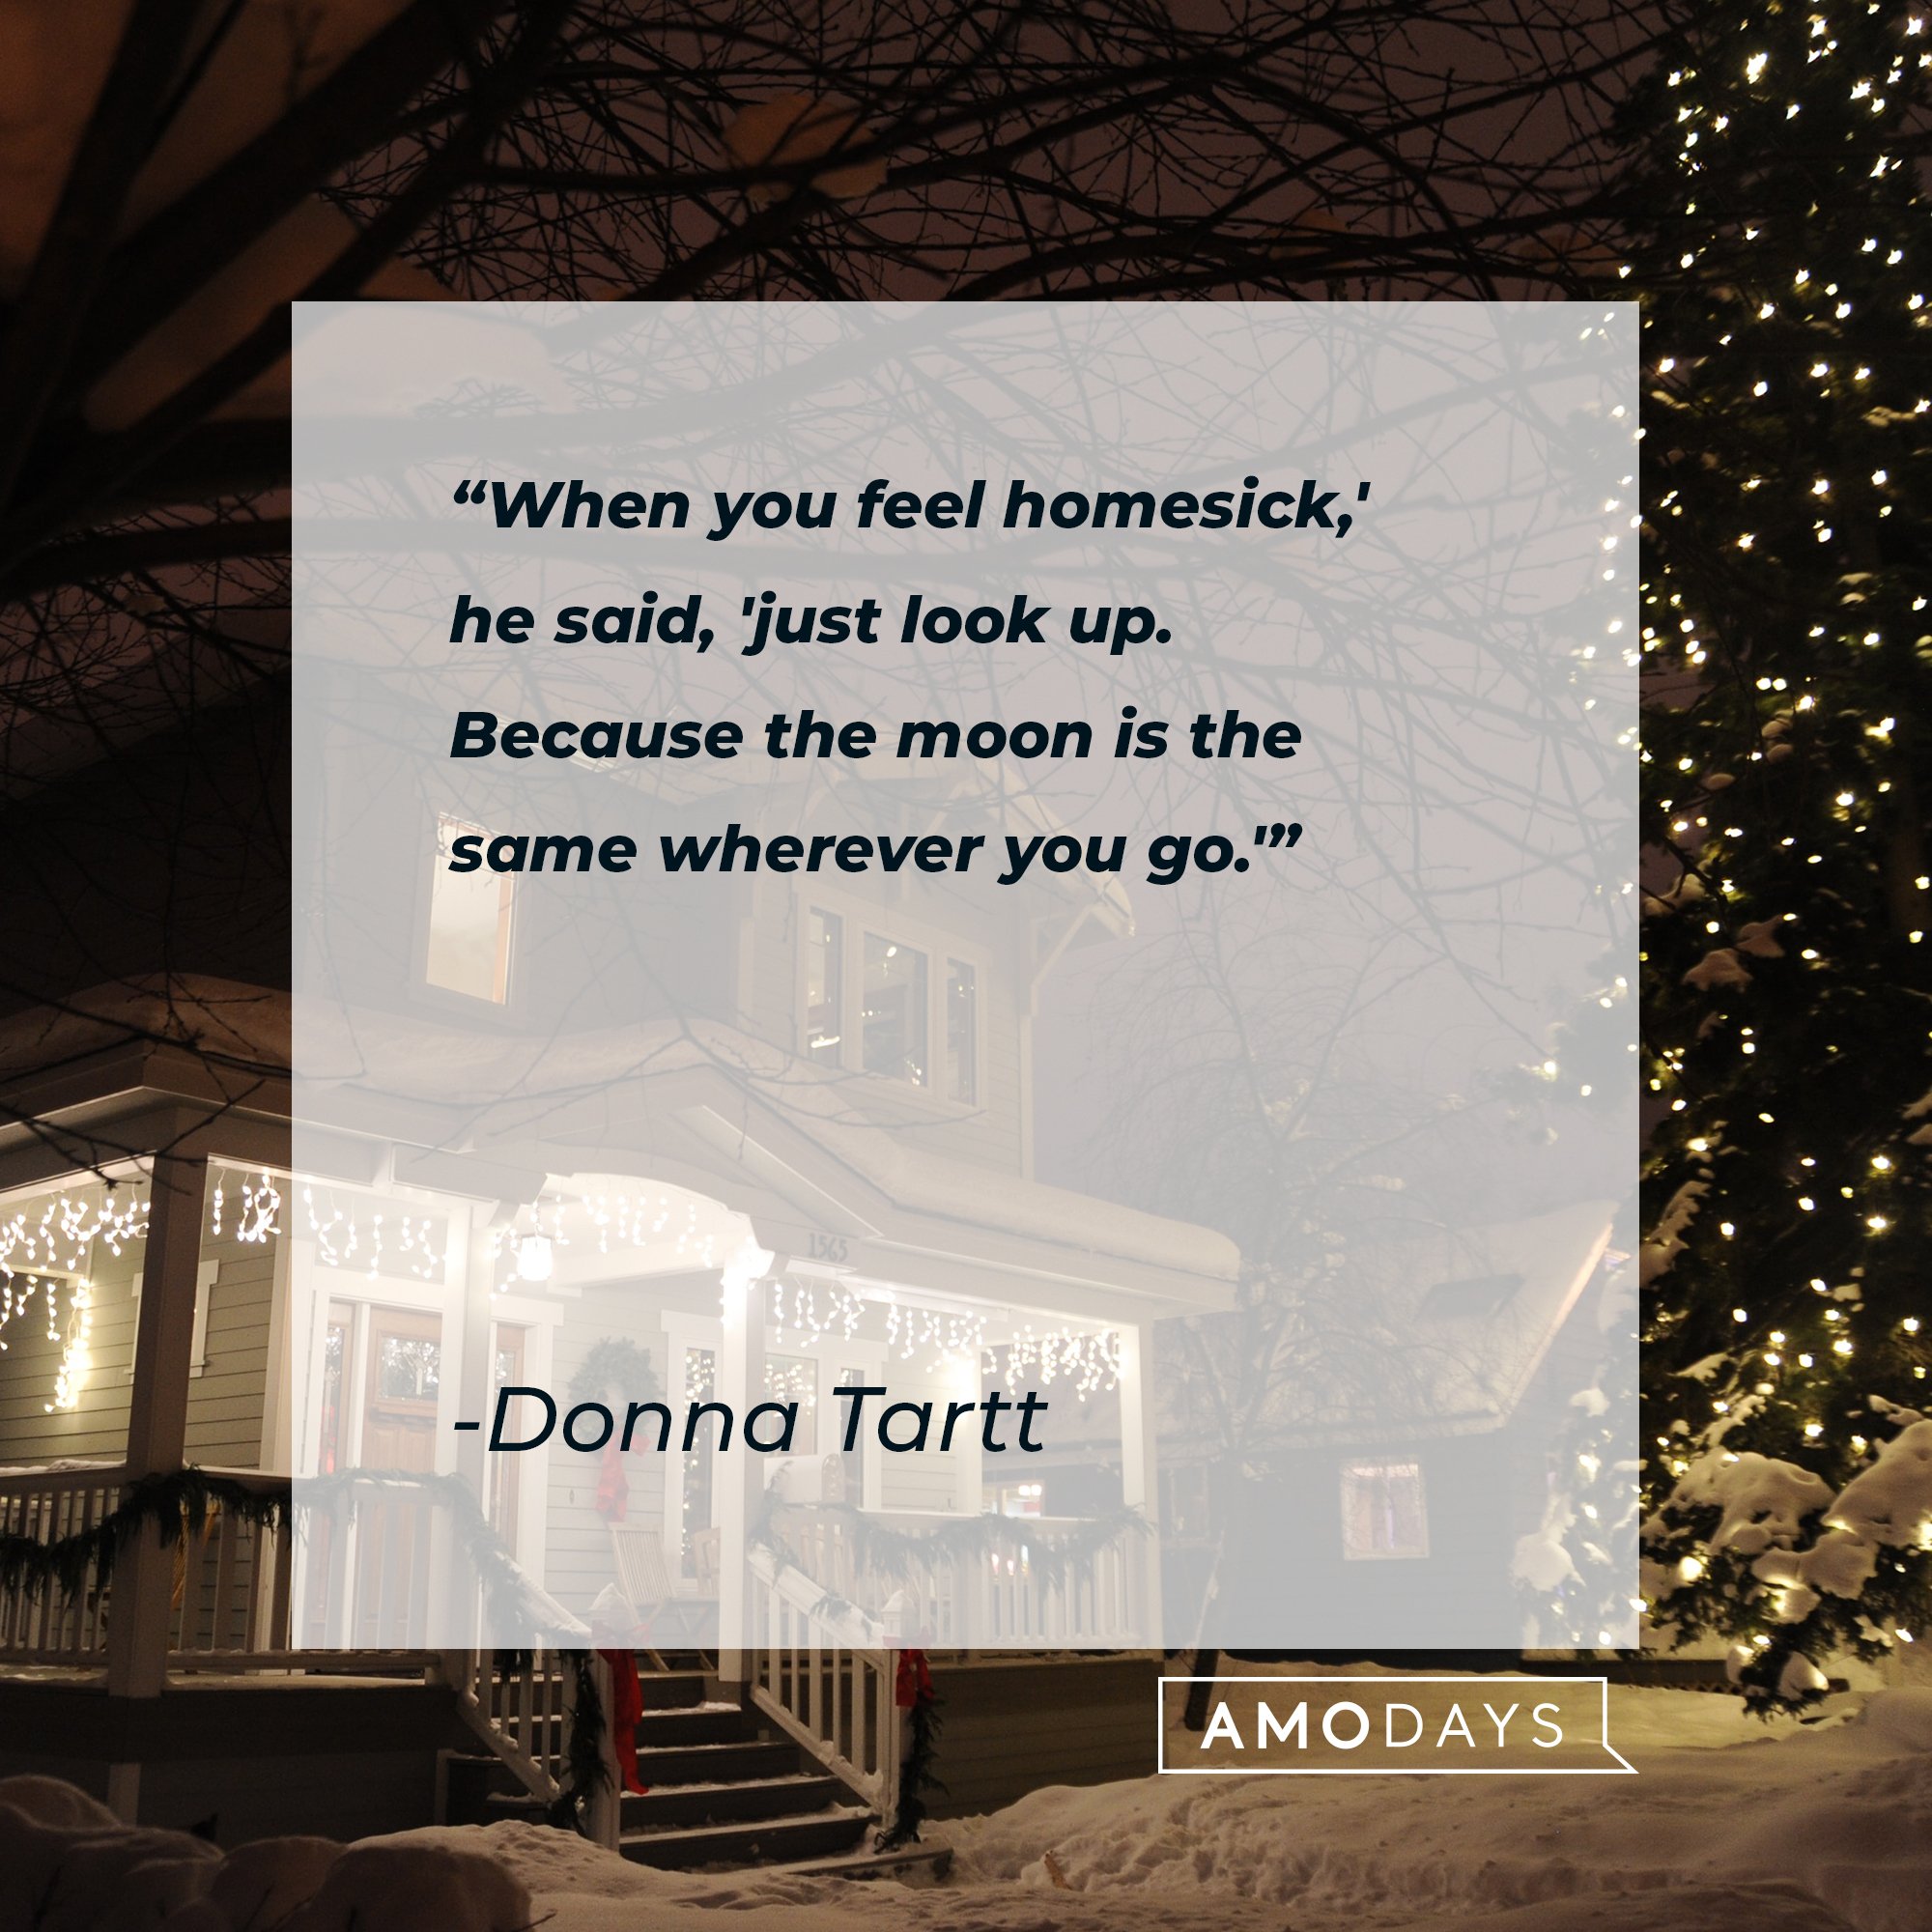 Donna Tartt's quote: "'When you feel homesick,' he said, 'just look up. Because the moon is the same wherever you go.'" | Image: AmoDays